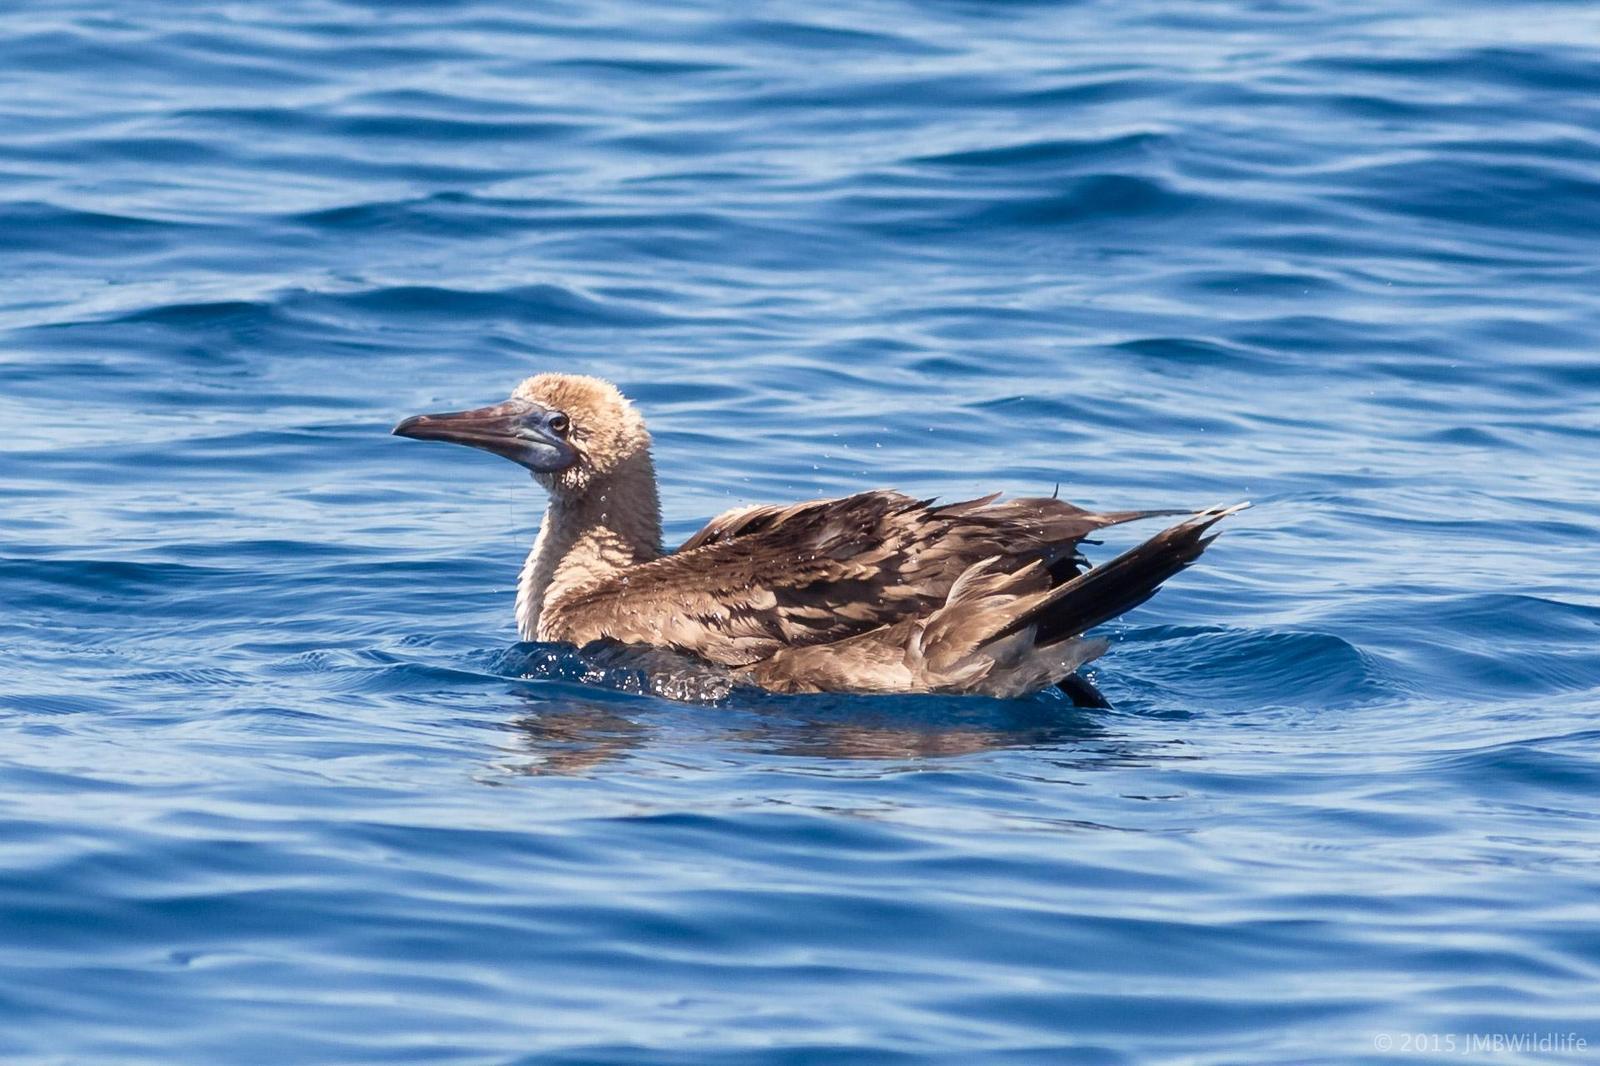 Red-footed Booby Photo by Jeff Bray